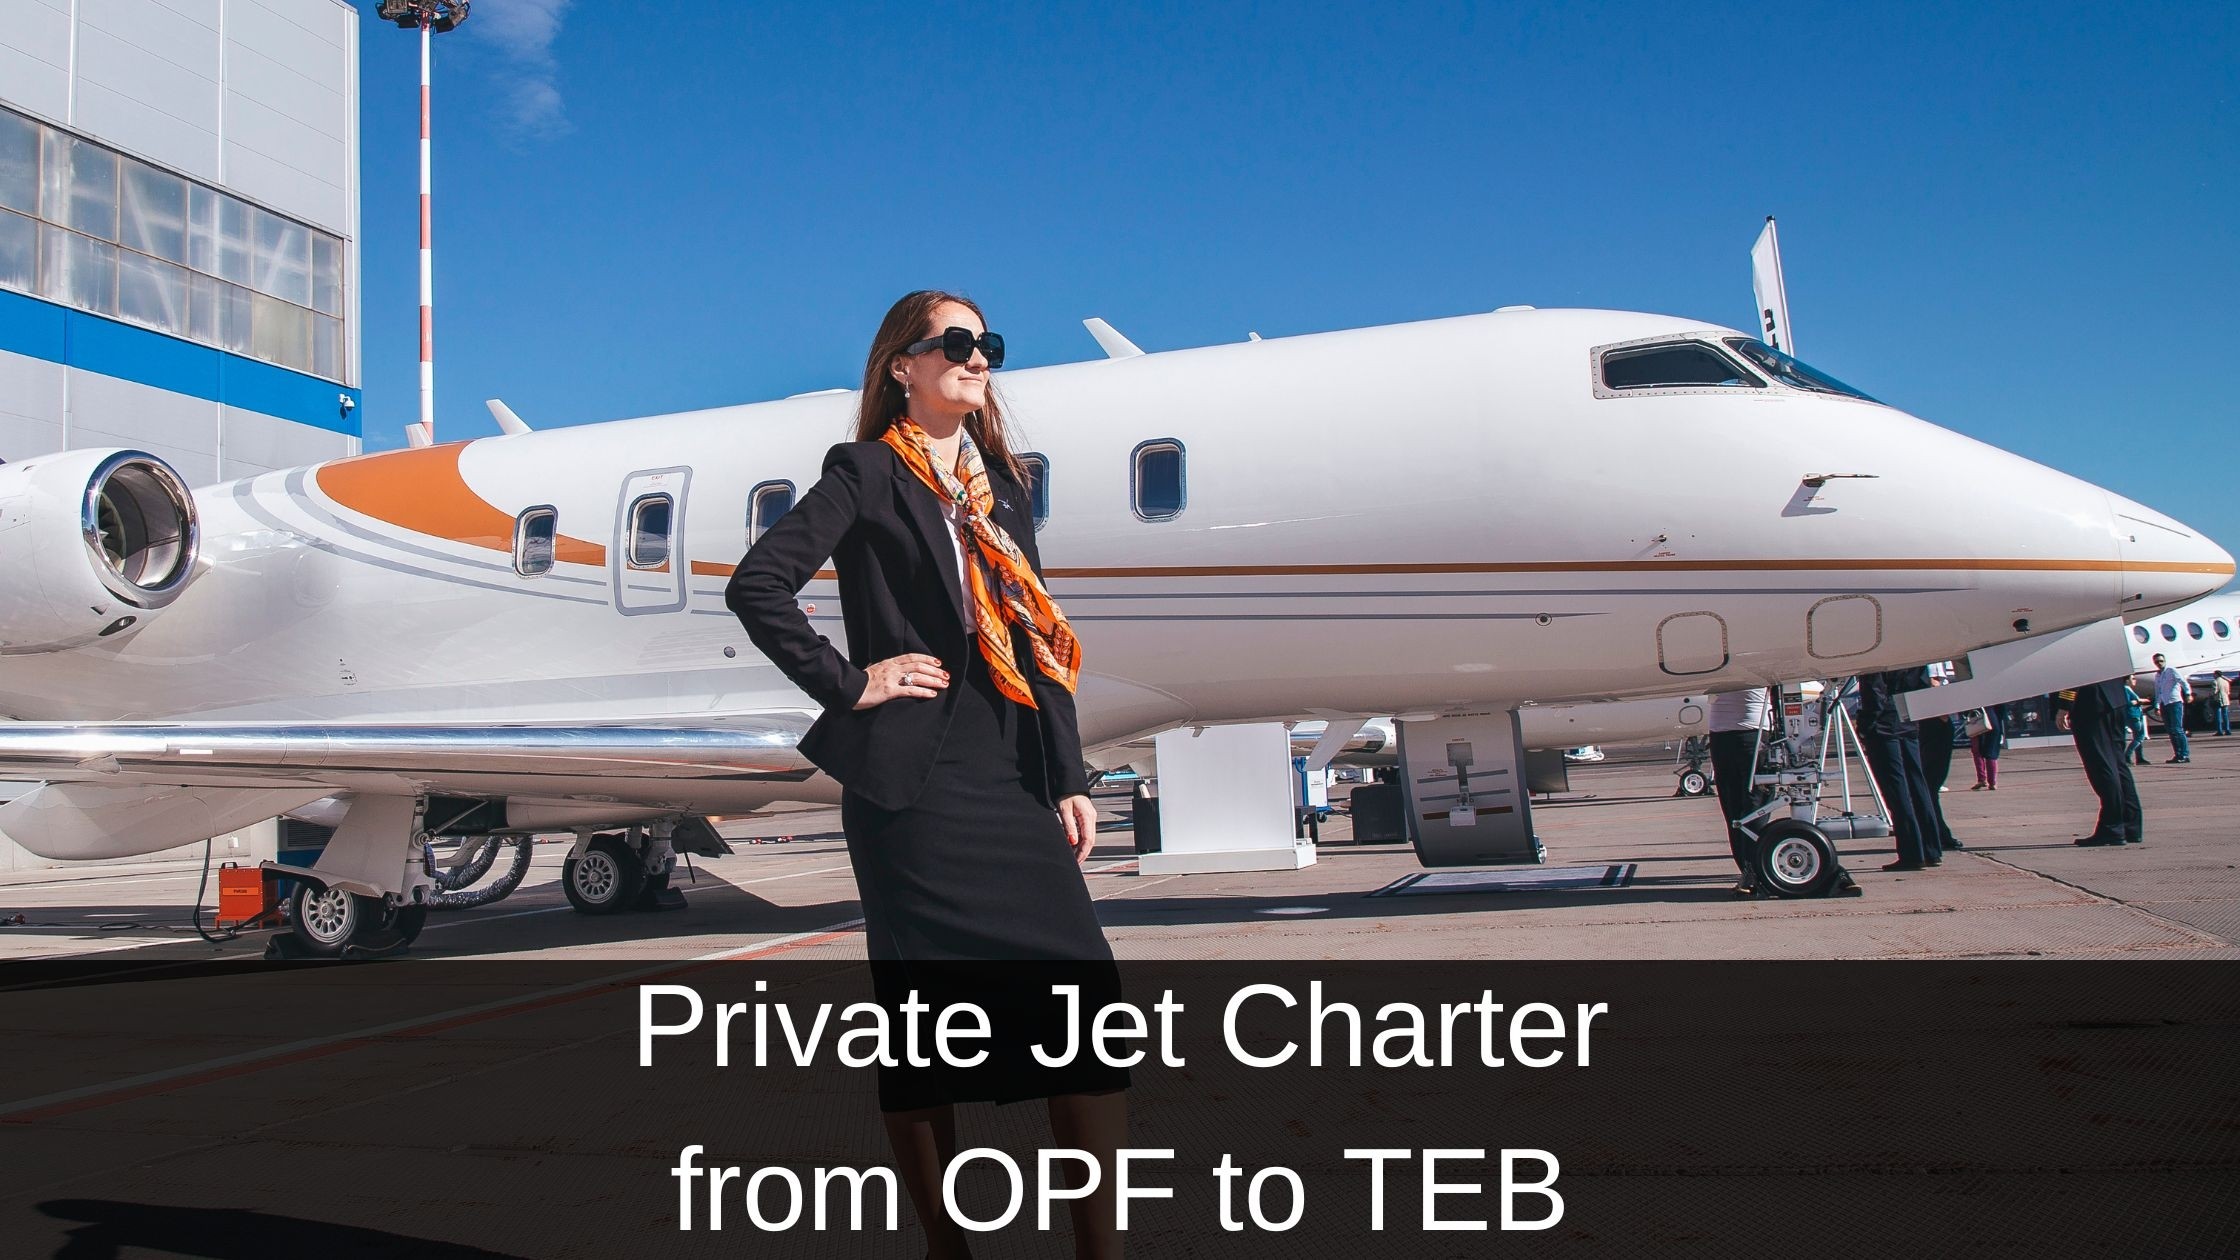 Private Jet Charter from OPF to TEB